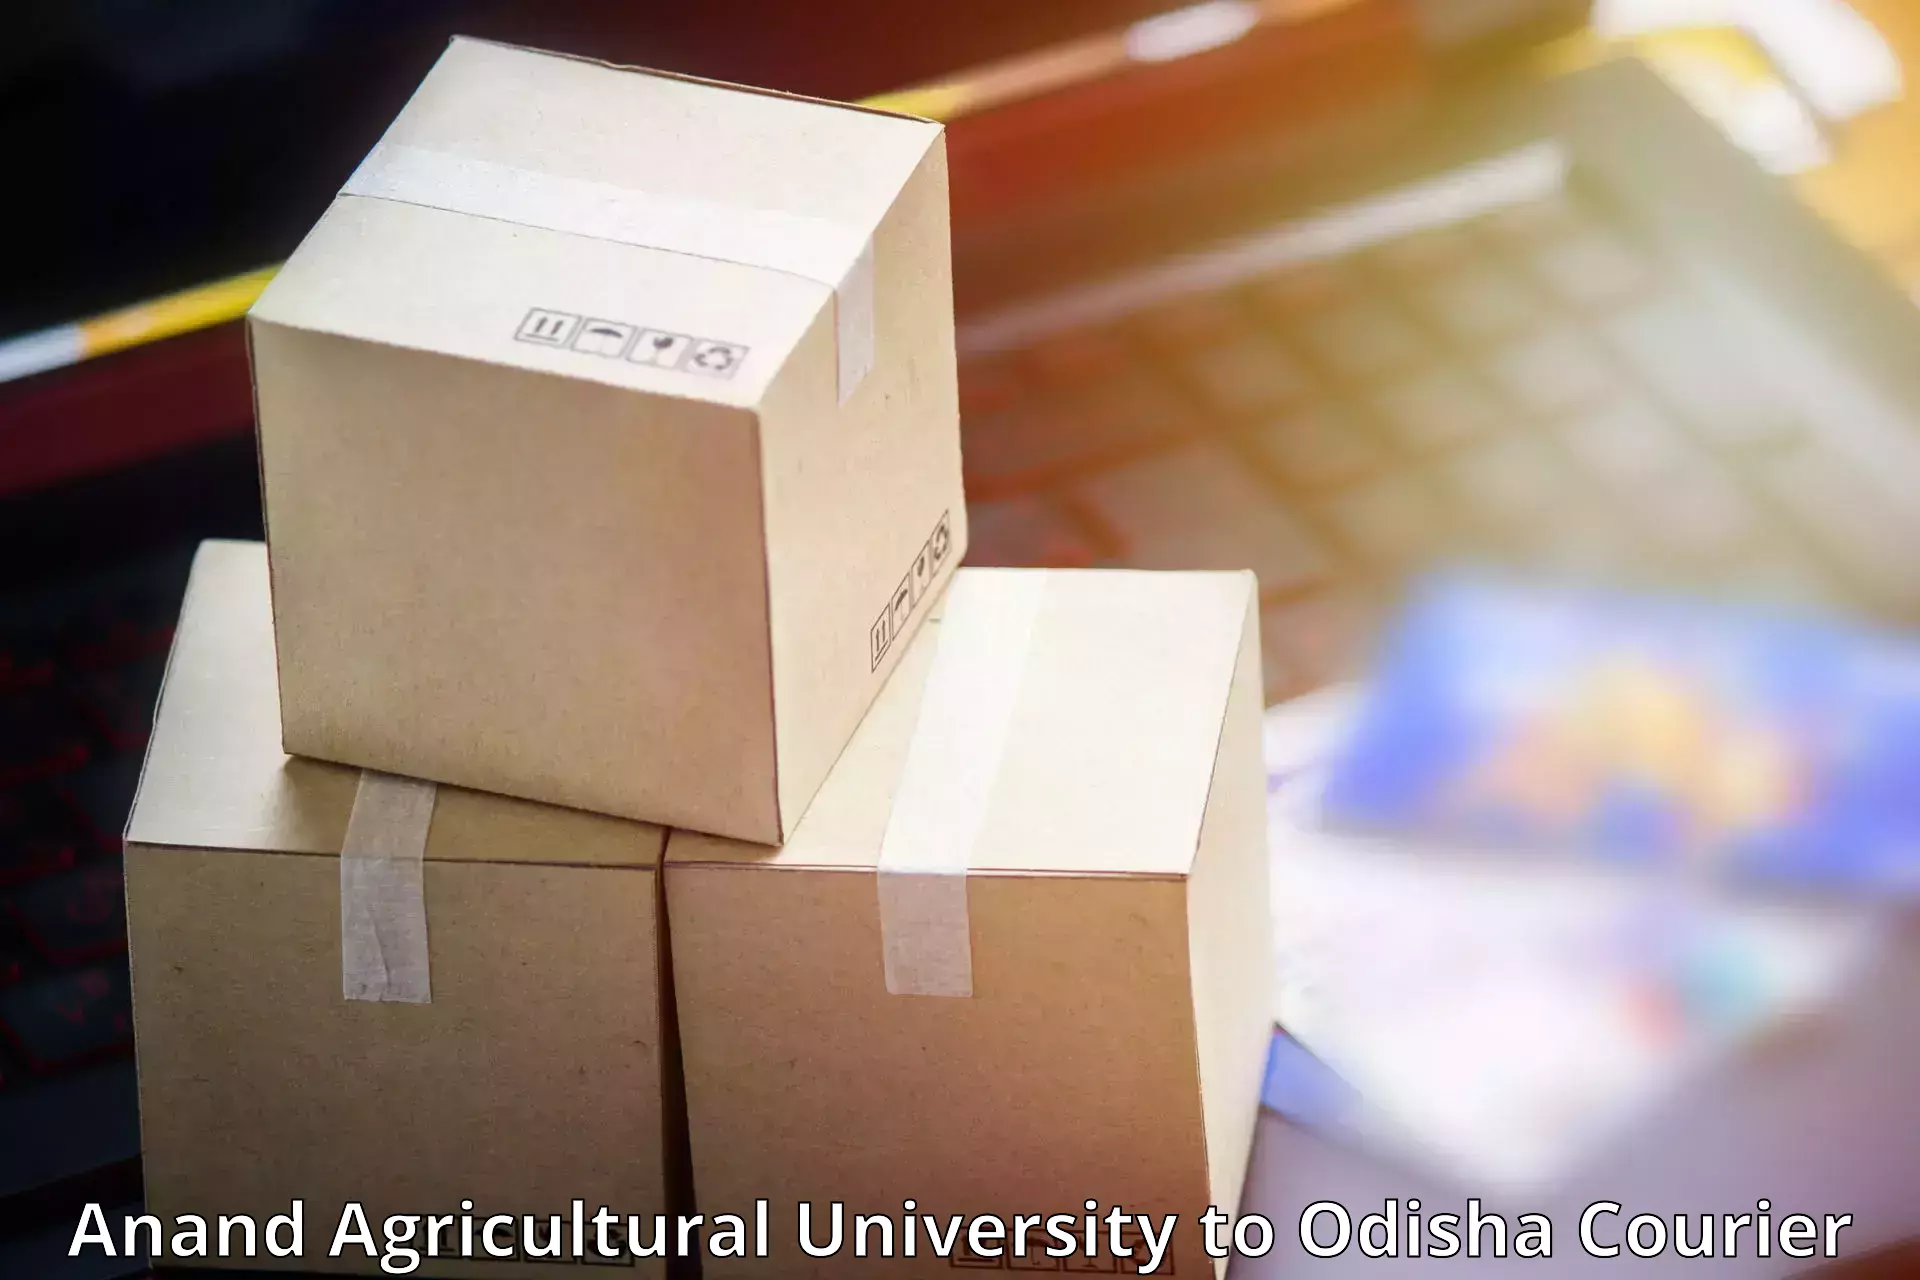 Efficient cargo handling Anand Agricultural University to Baleswar